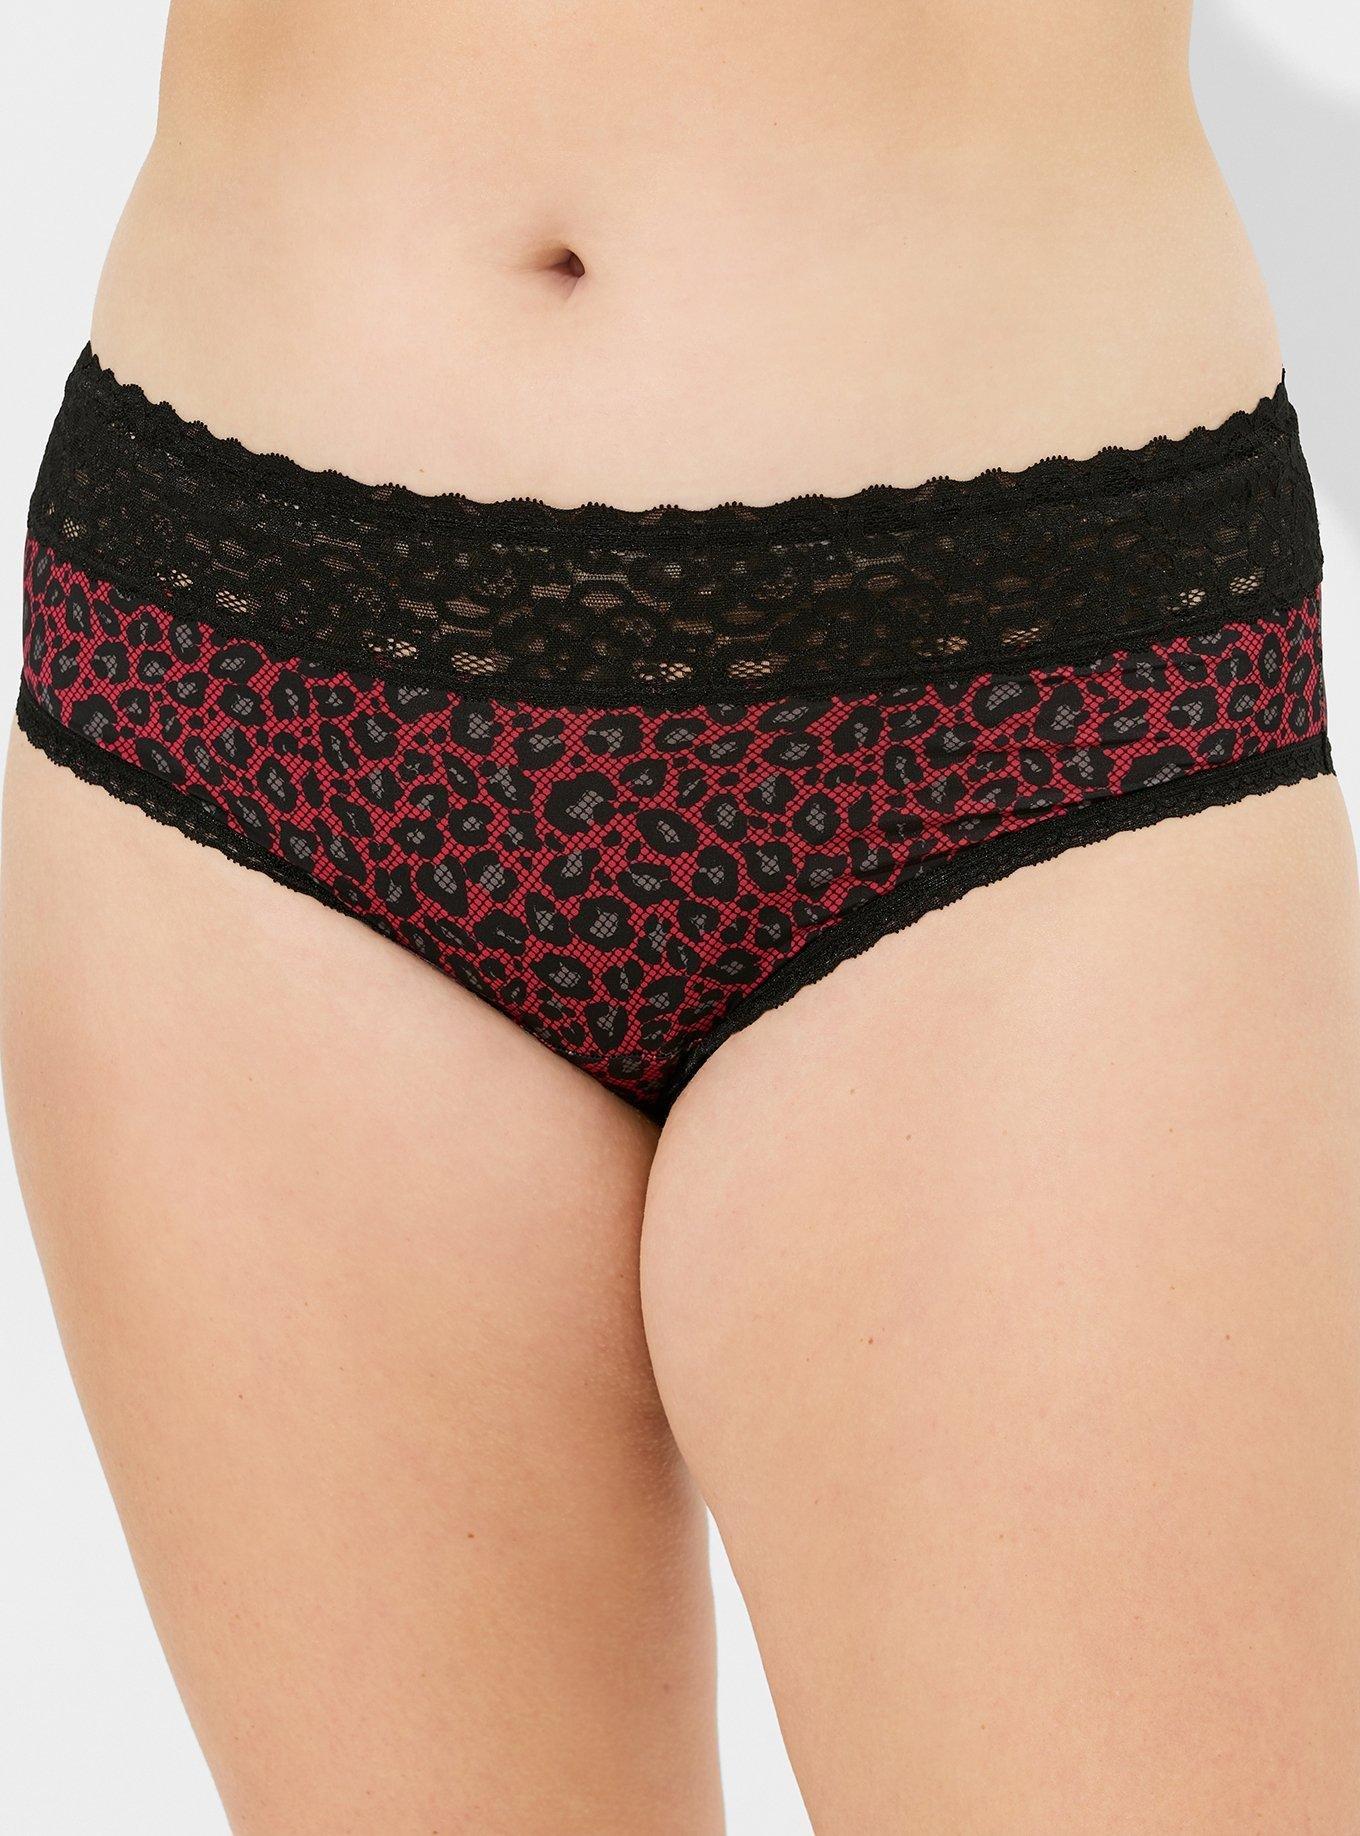 Official Batman Dots and Symbols Hipster Panty: Buy Online on Offer